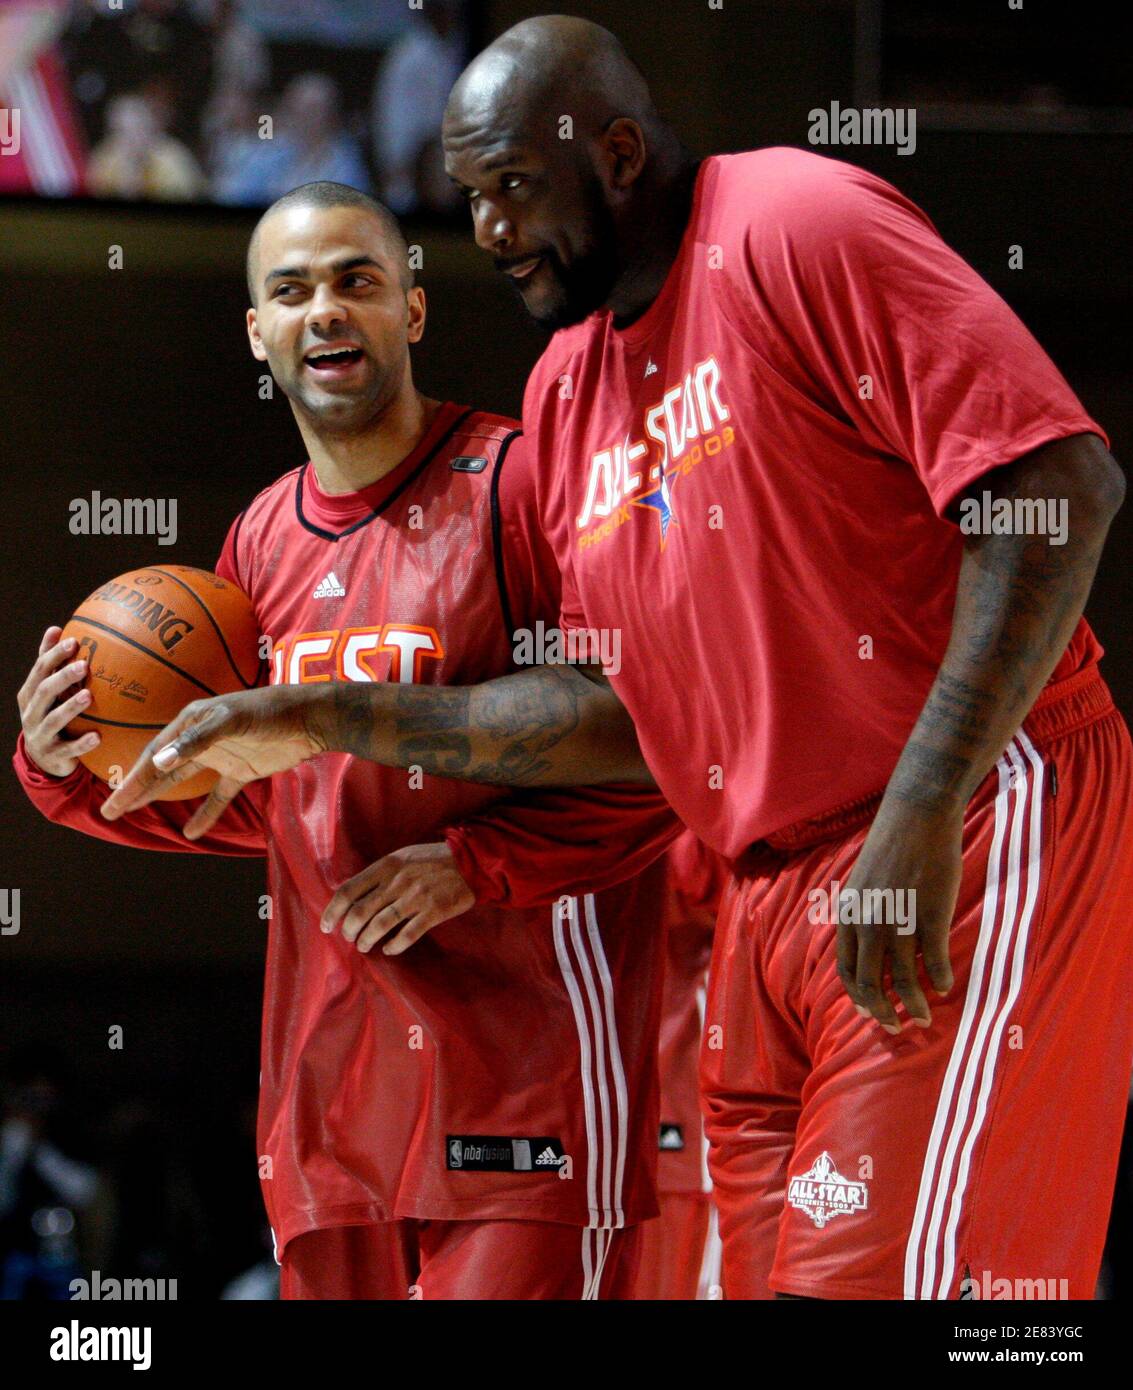 Shaquille O'Neal from the Phoenix Suns (R) jokes with Tony Parker of France  from the San Antonio Spurs during team practice for the NBA All-Star  basketball game in Phoenix, Arizona, February 14,